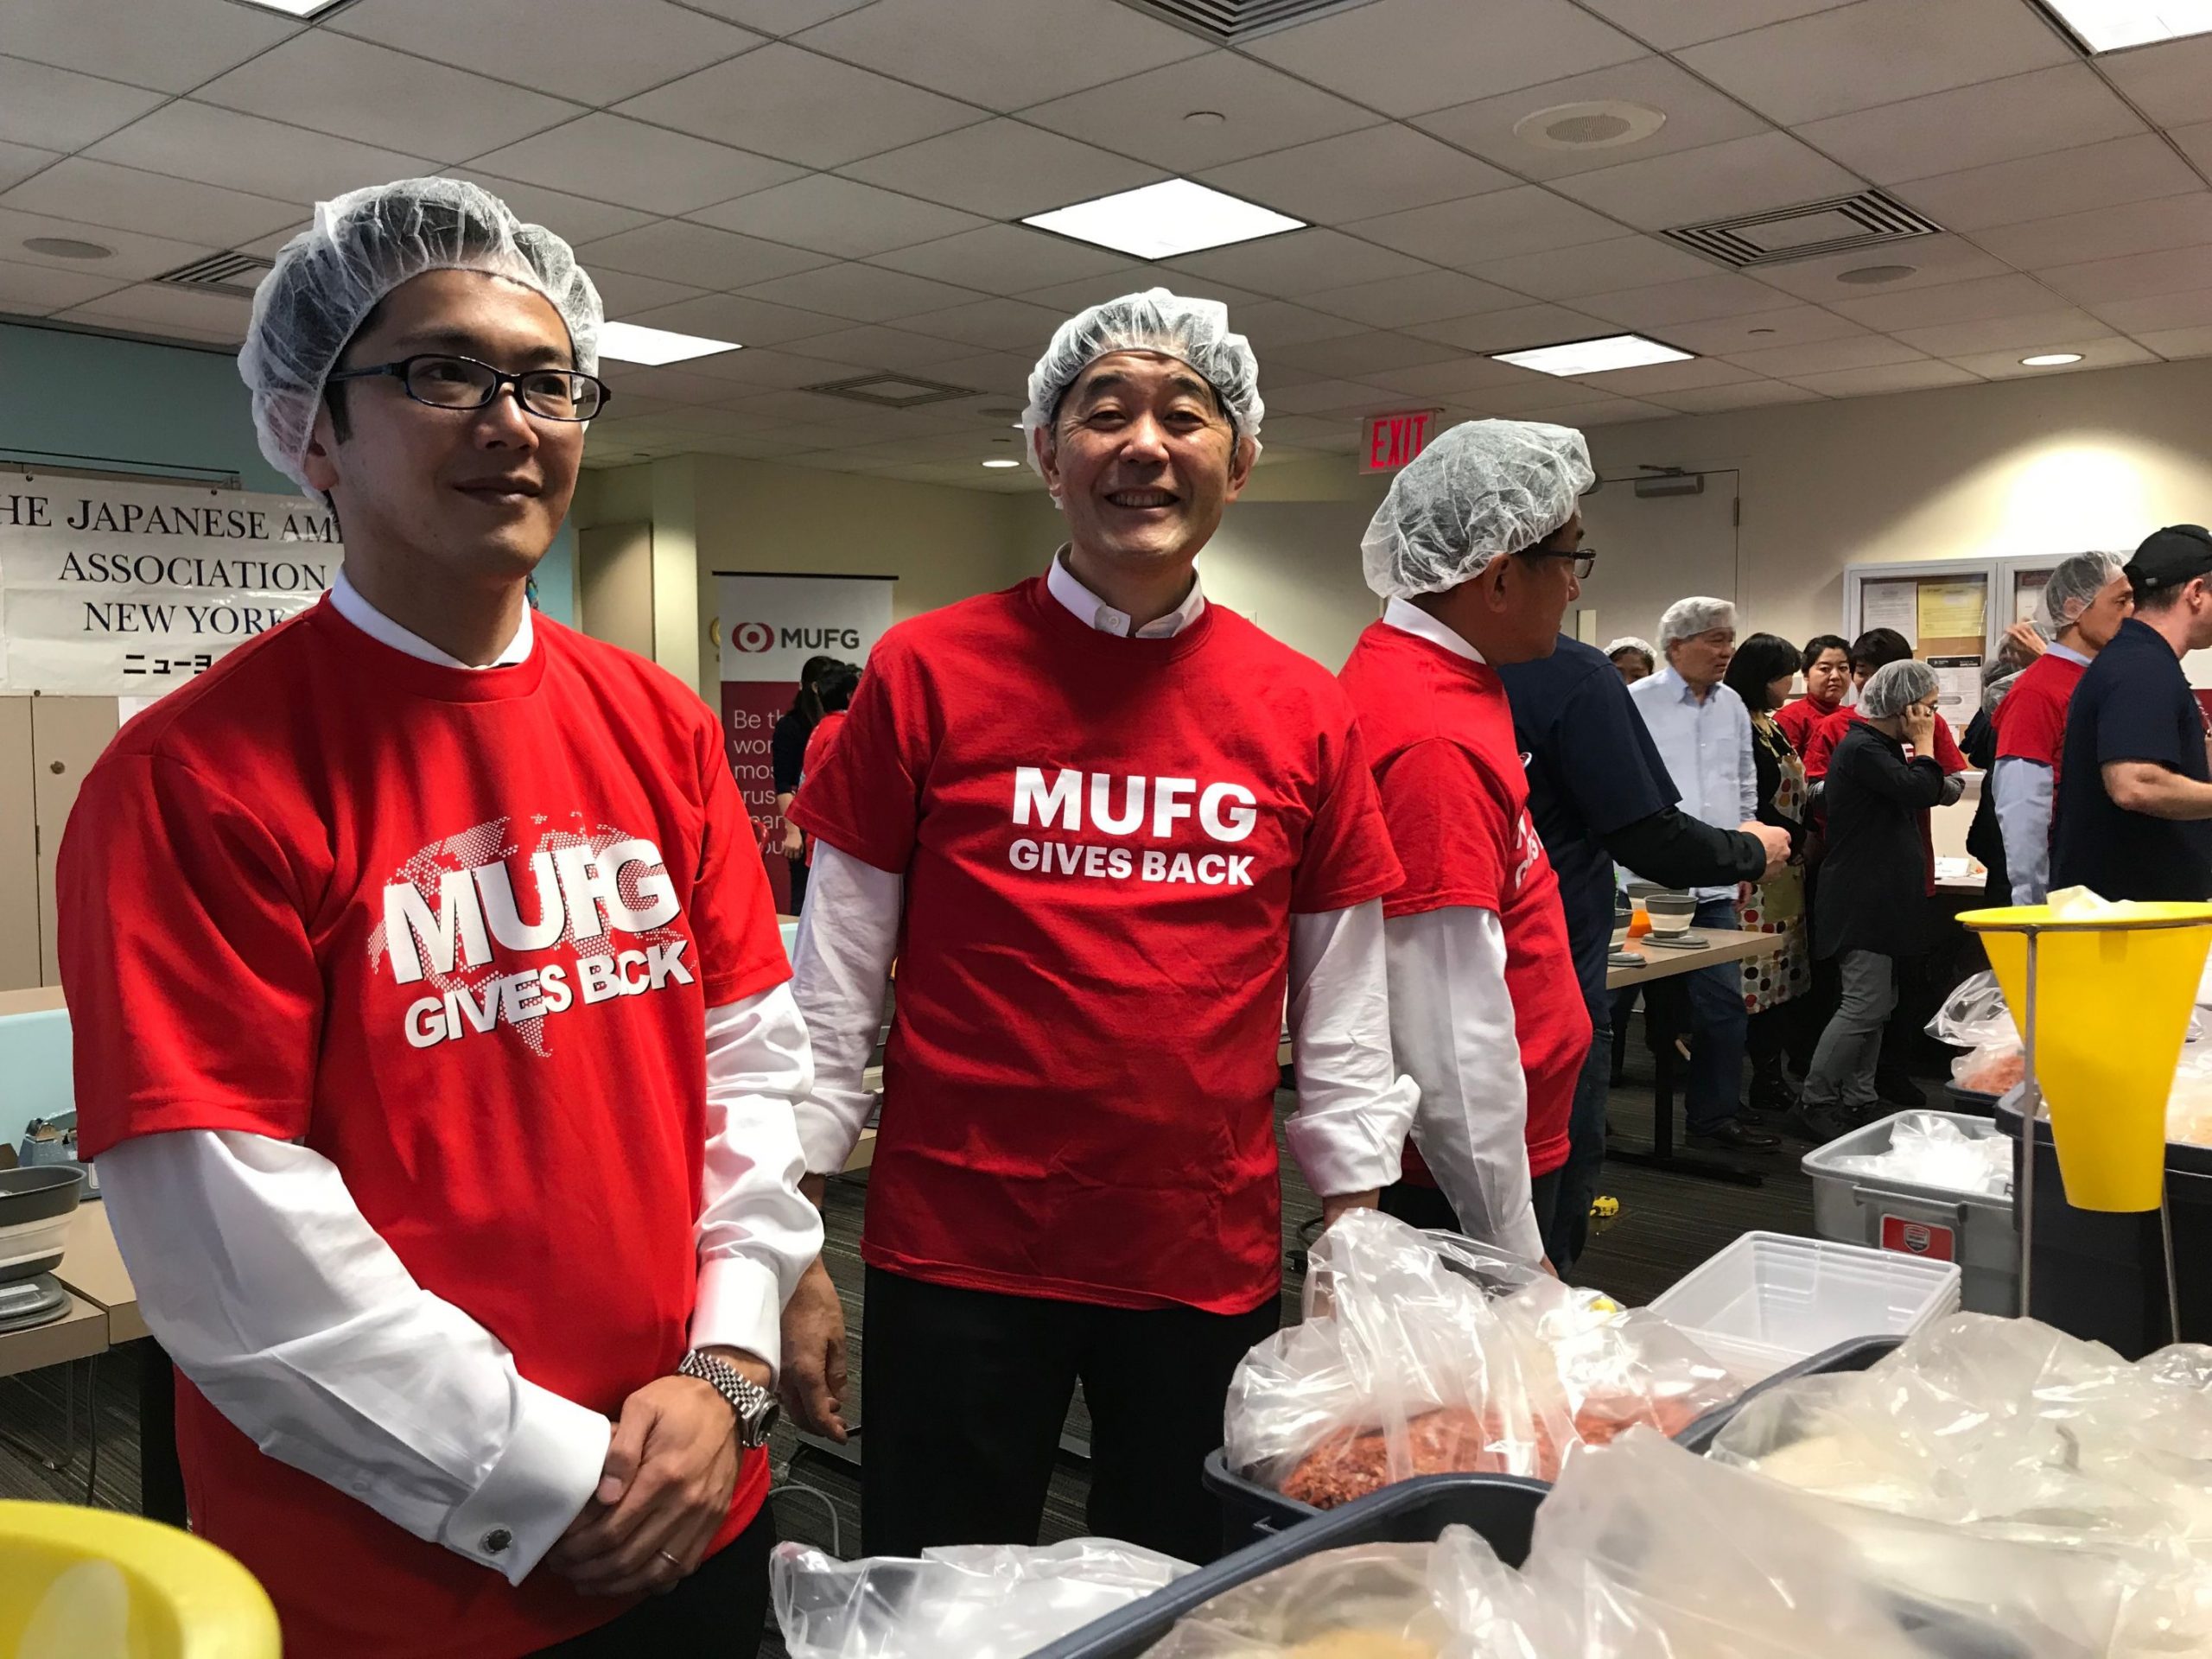 Volunteers wearing red MUFG t-shirts and hairnets